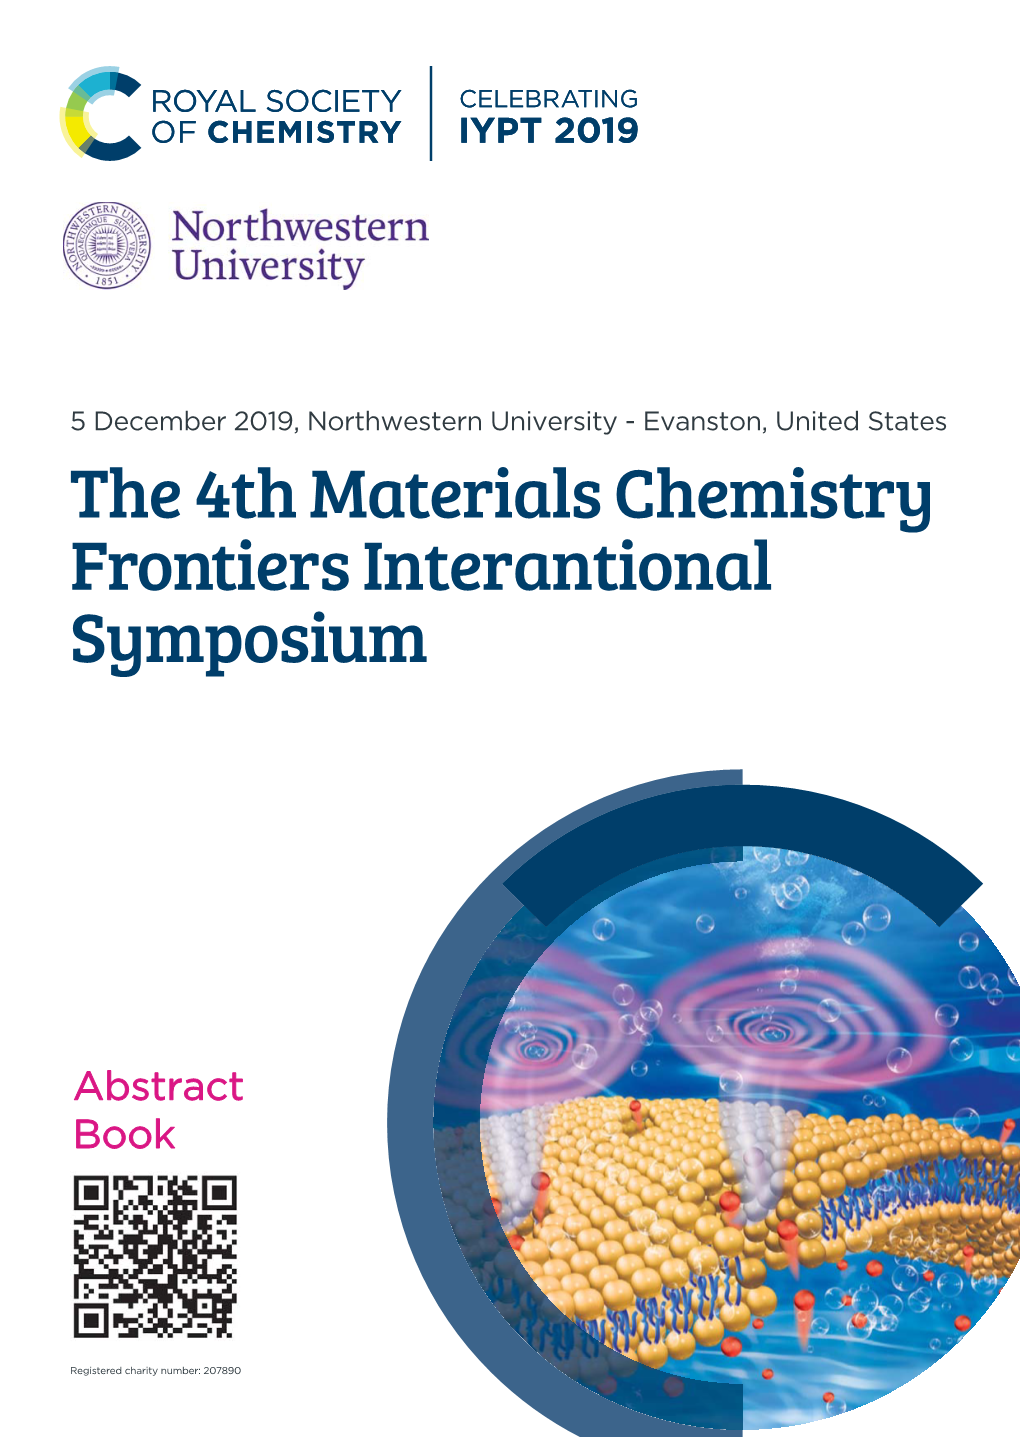 The 4Th Materials Chemistry Frontiers -RXIVERXMSREP Symposium